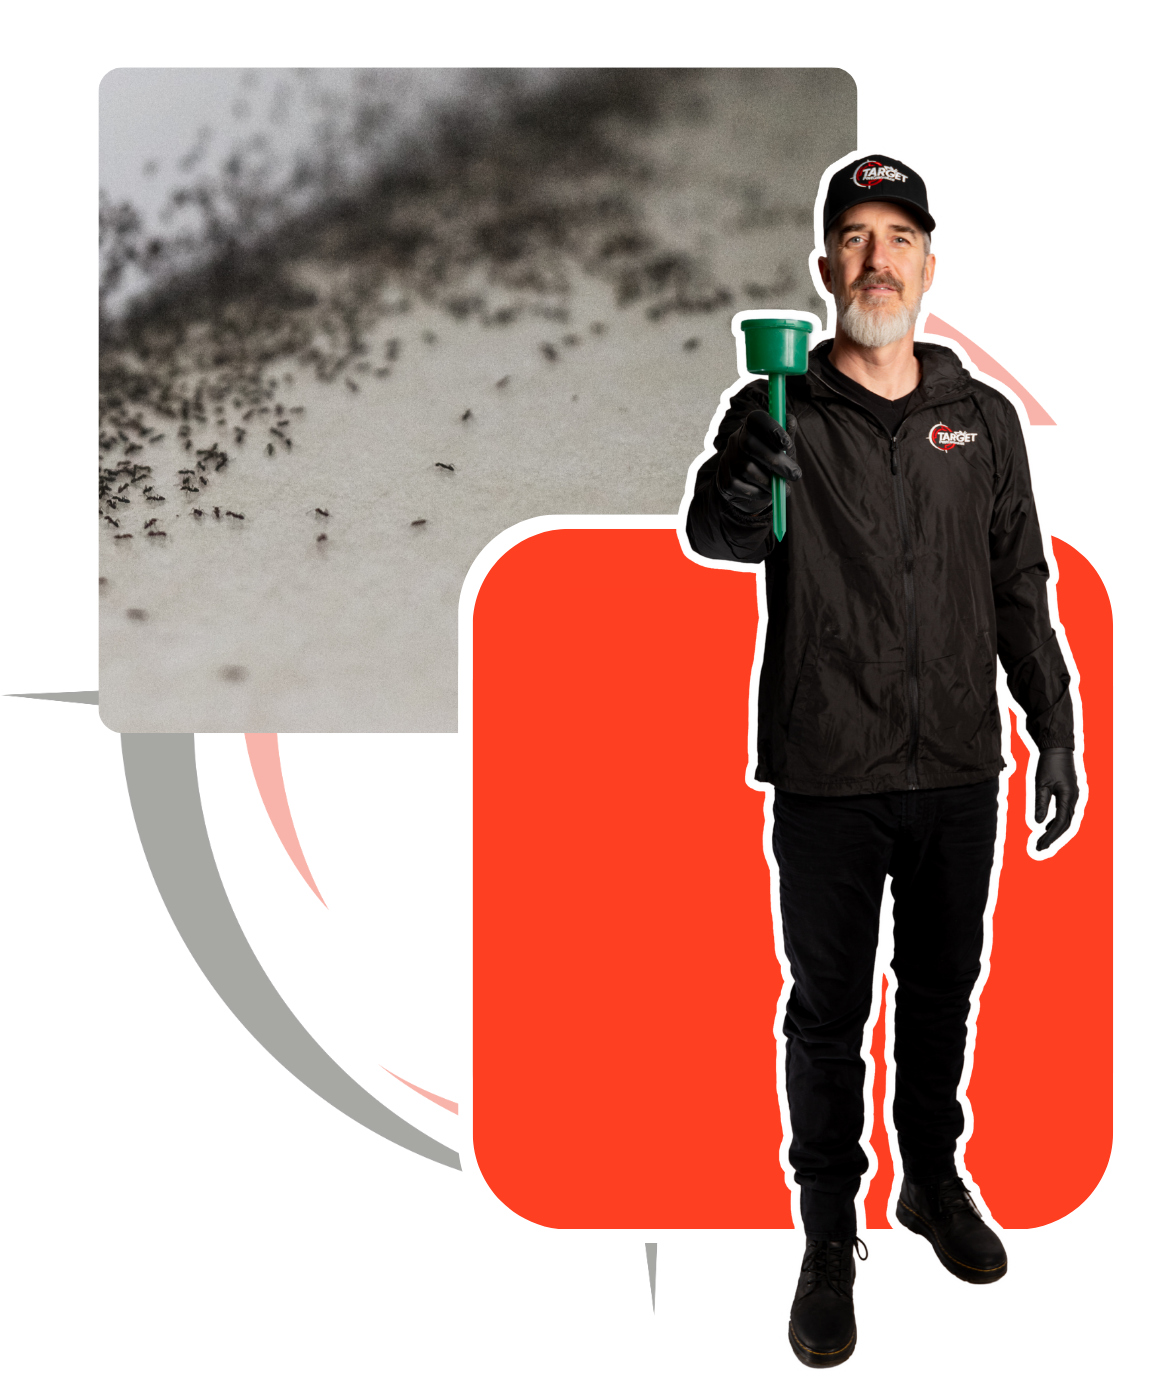 A man in a black jacket is holding a green ant bait stations with picture of ants behind him